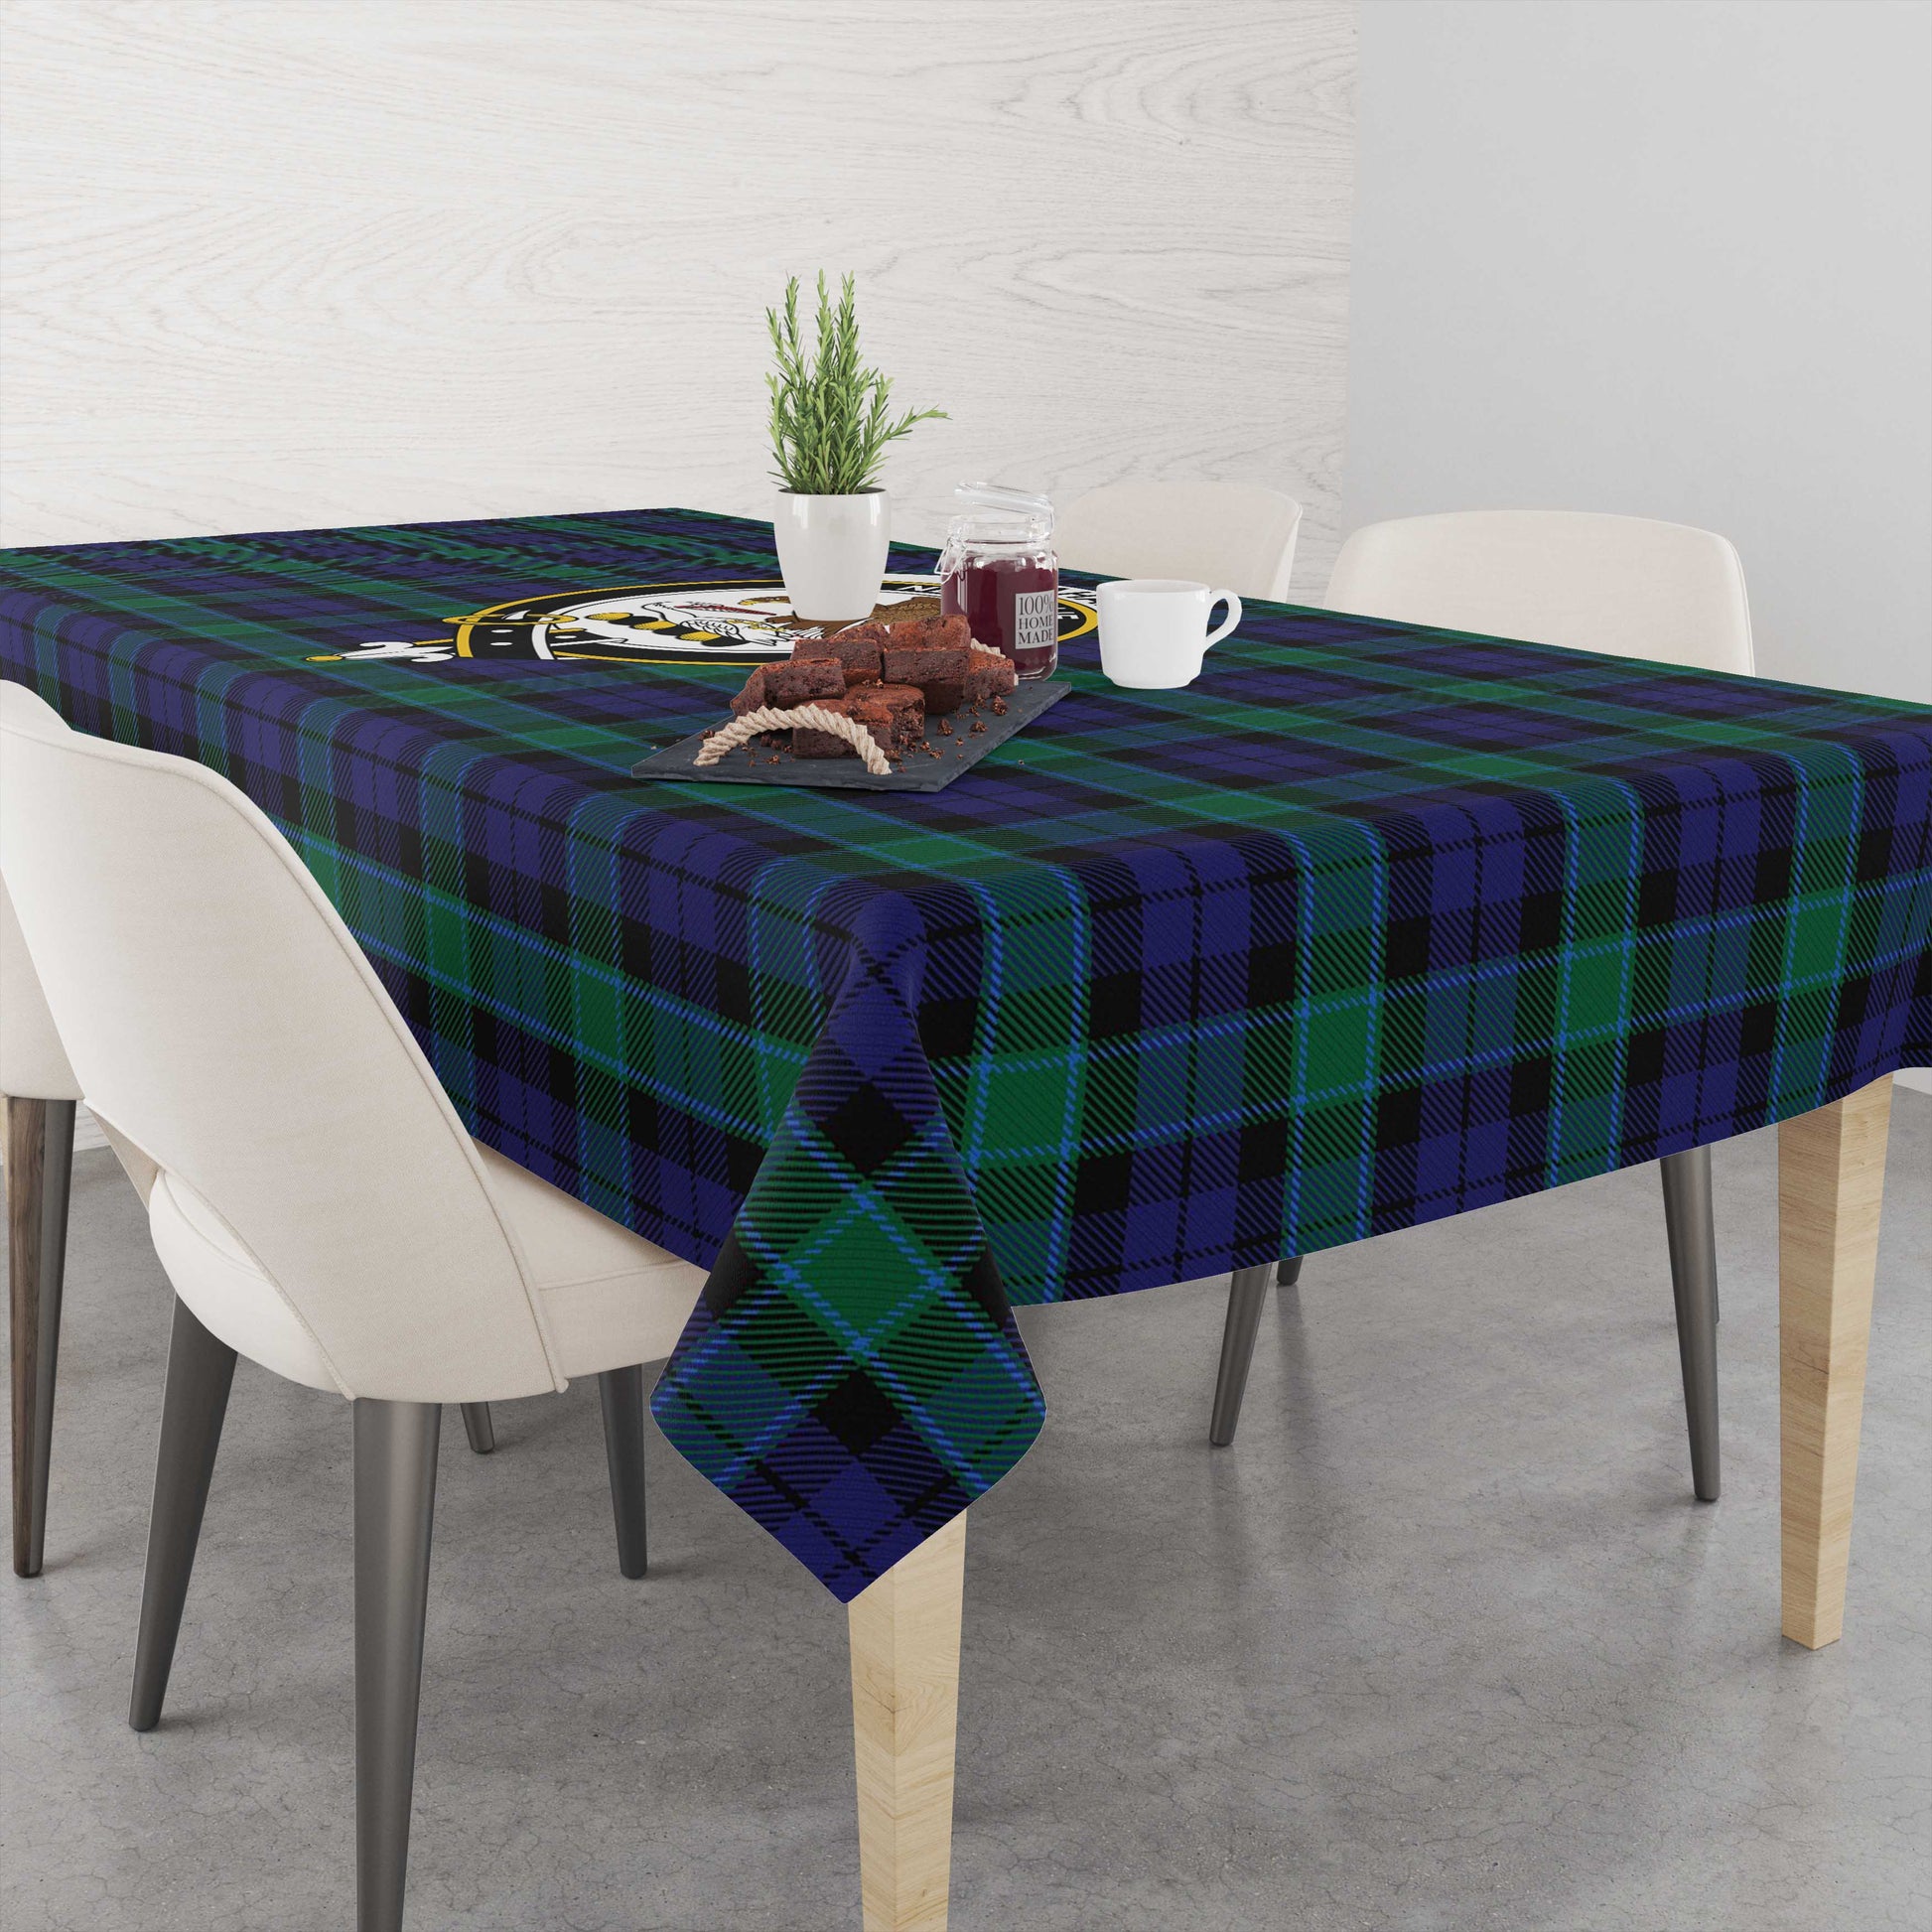 graham-of-menteith-tatan-tablecloth-with-family-crest